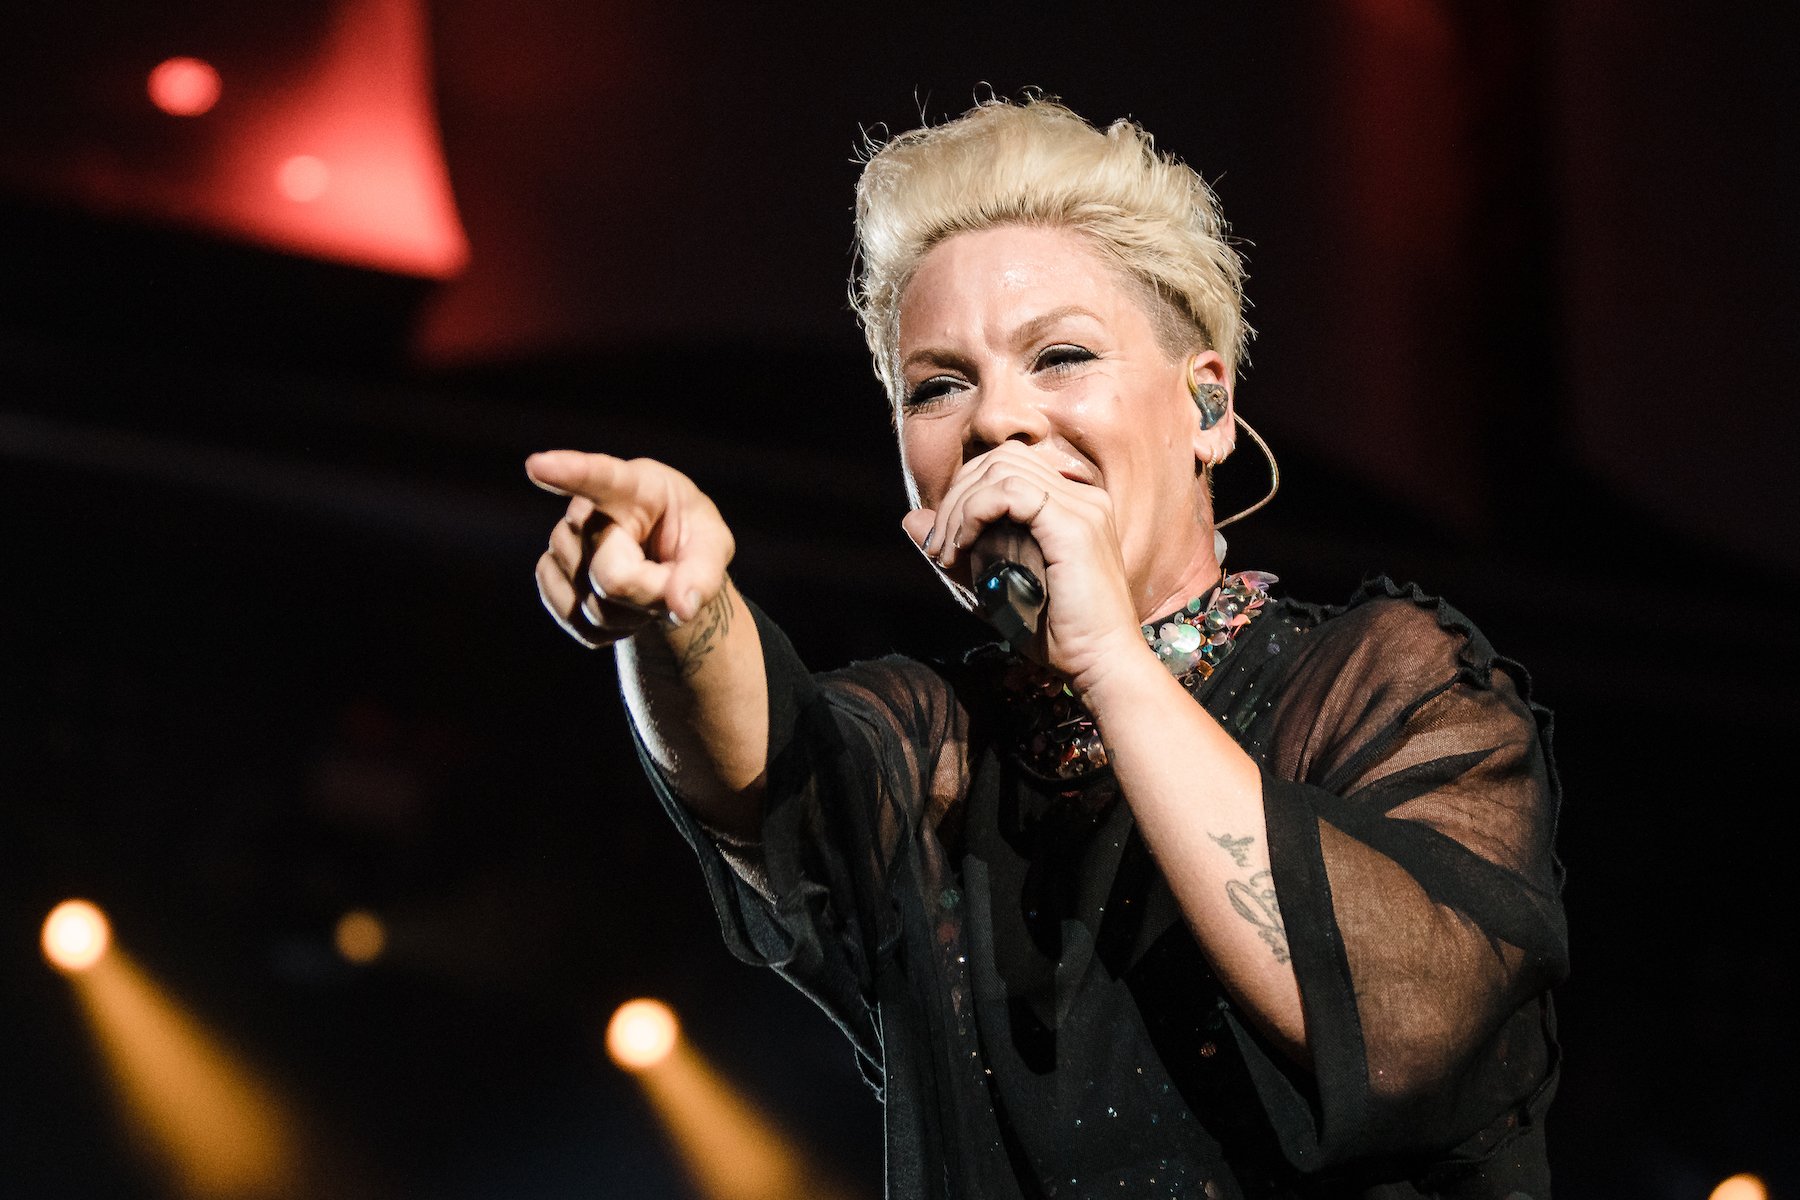 P!nk, one of the performers at the 2022 AMAs, wearing black and singing into a mic